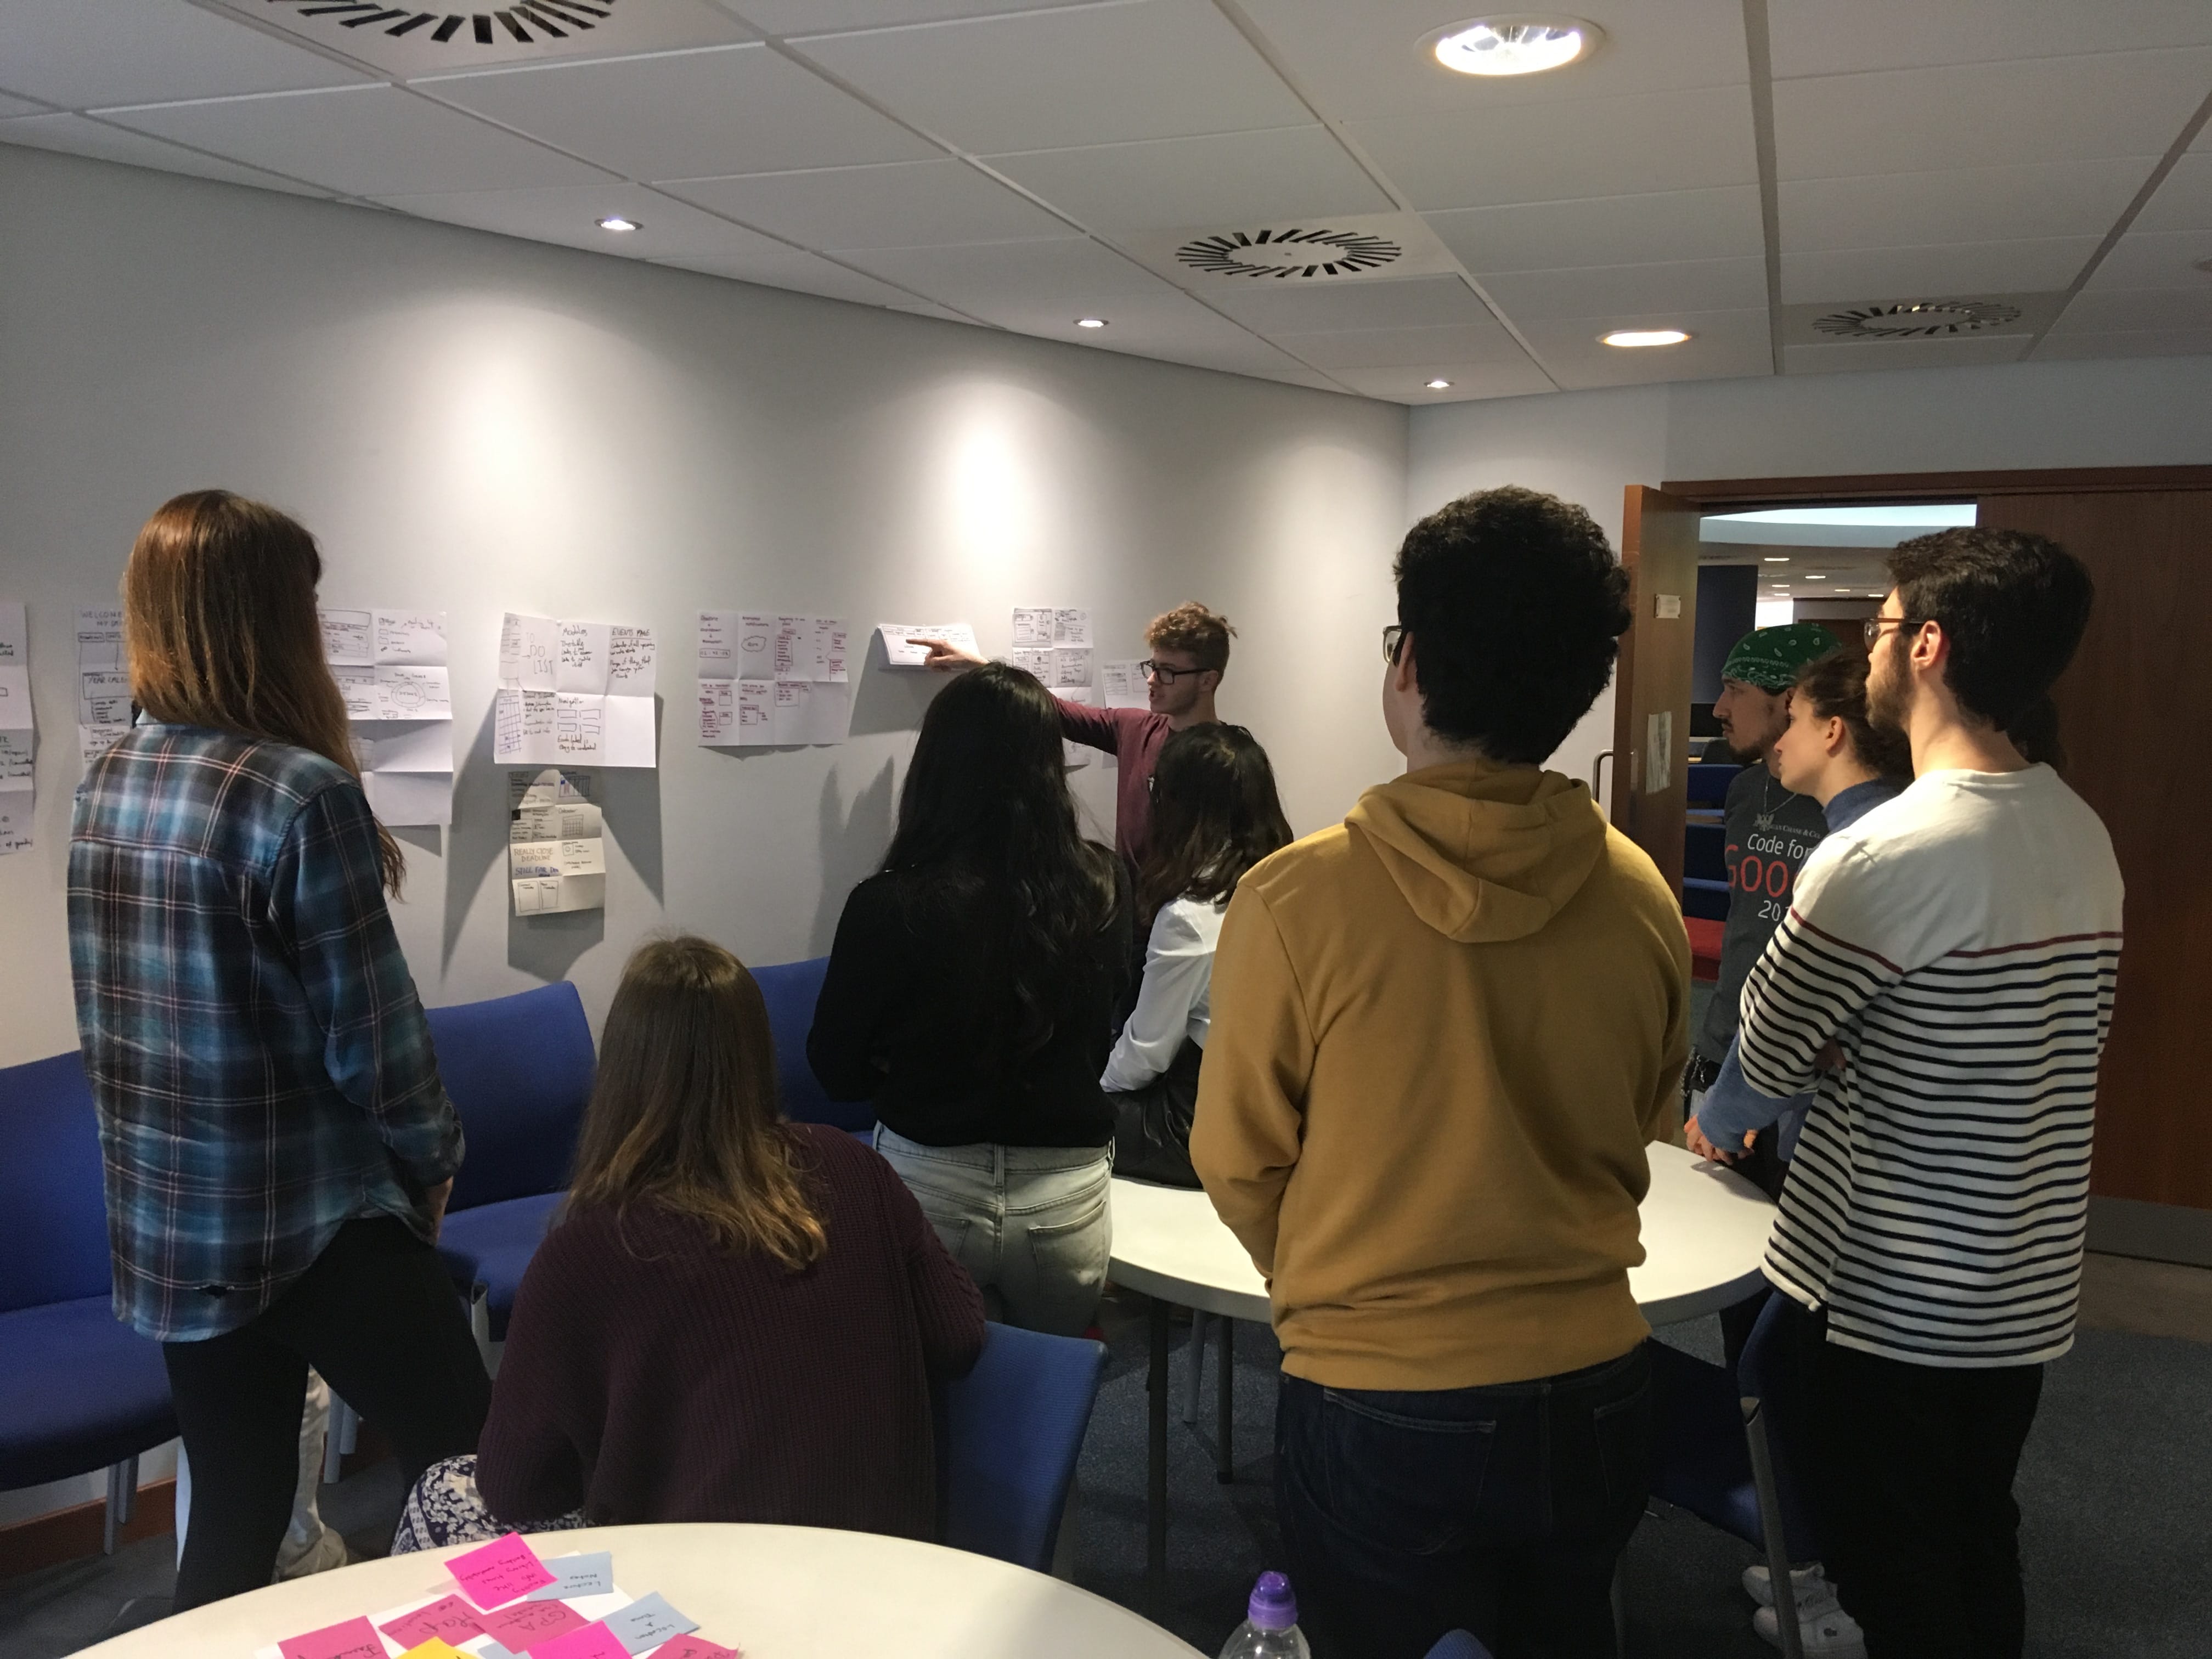 Students standing looking at design sprint ideas stuck to the wall.